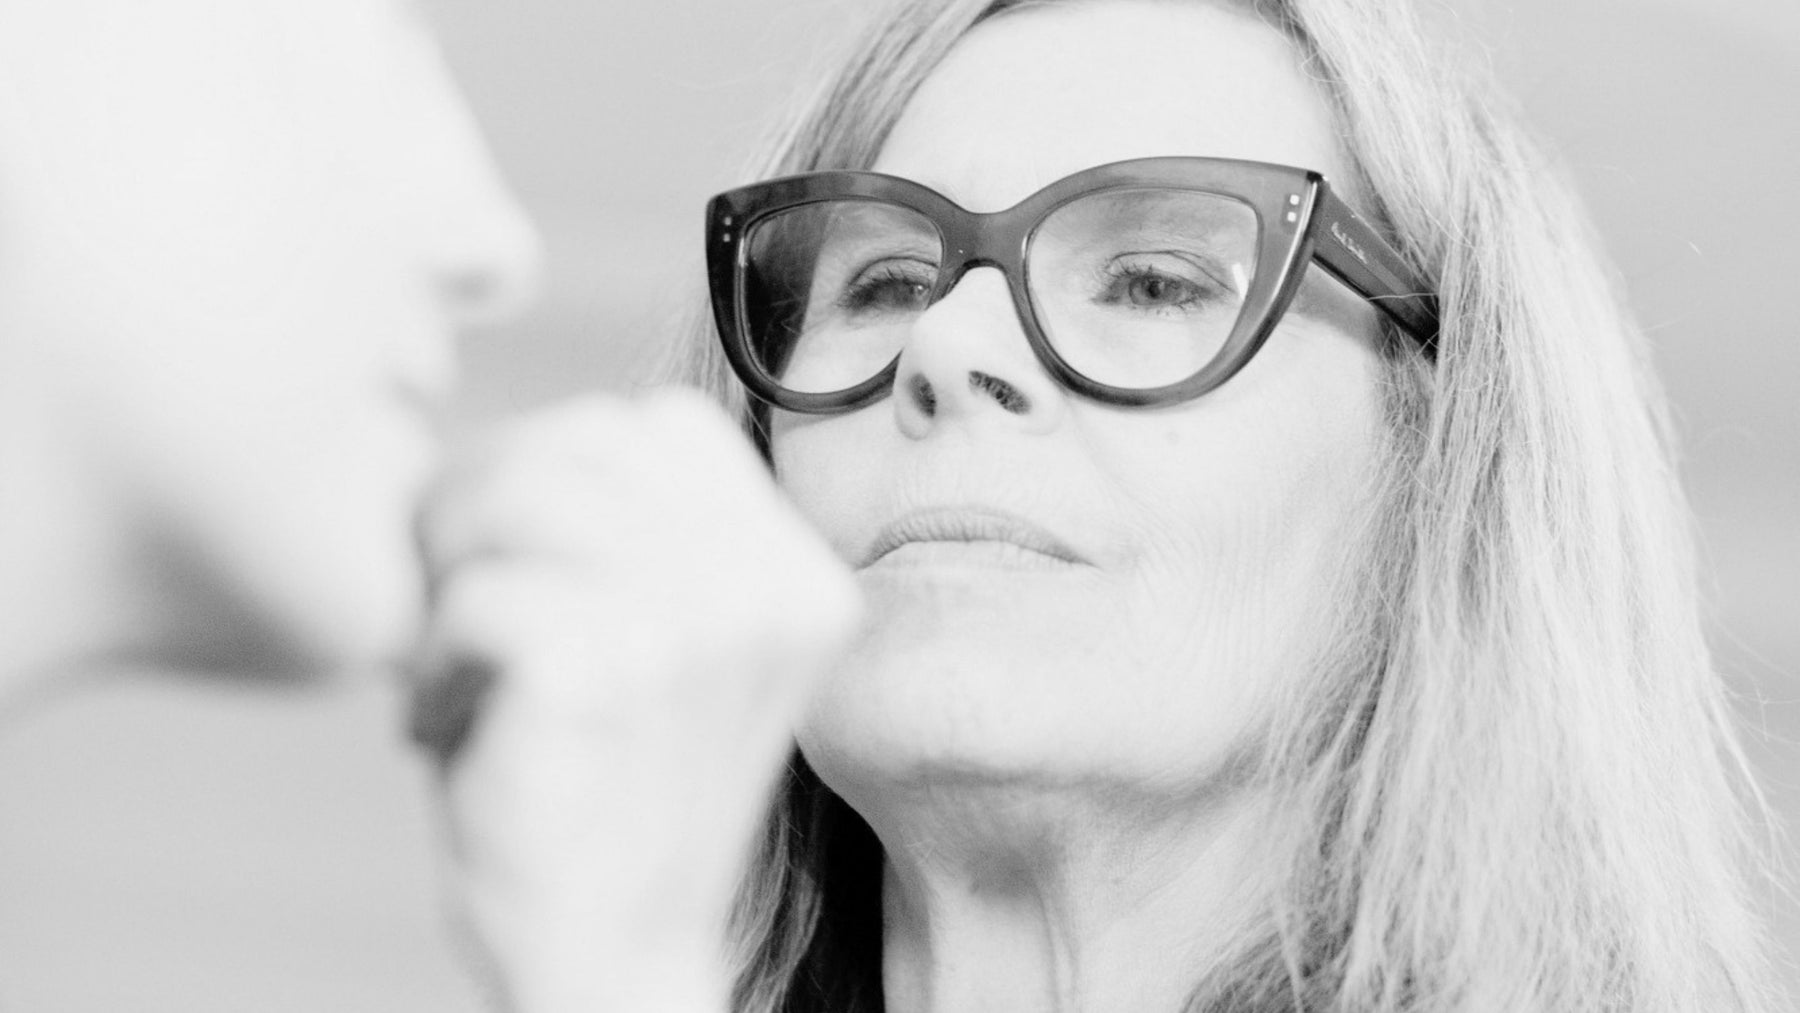 SAPPHO makeup brand founder JoAnn Fowler applying makeup on someone, up close in black and white